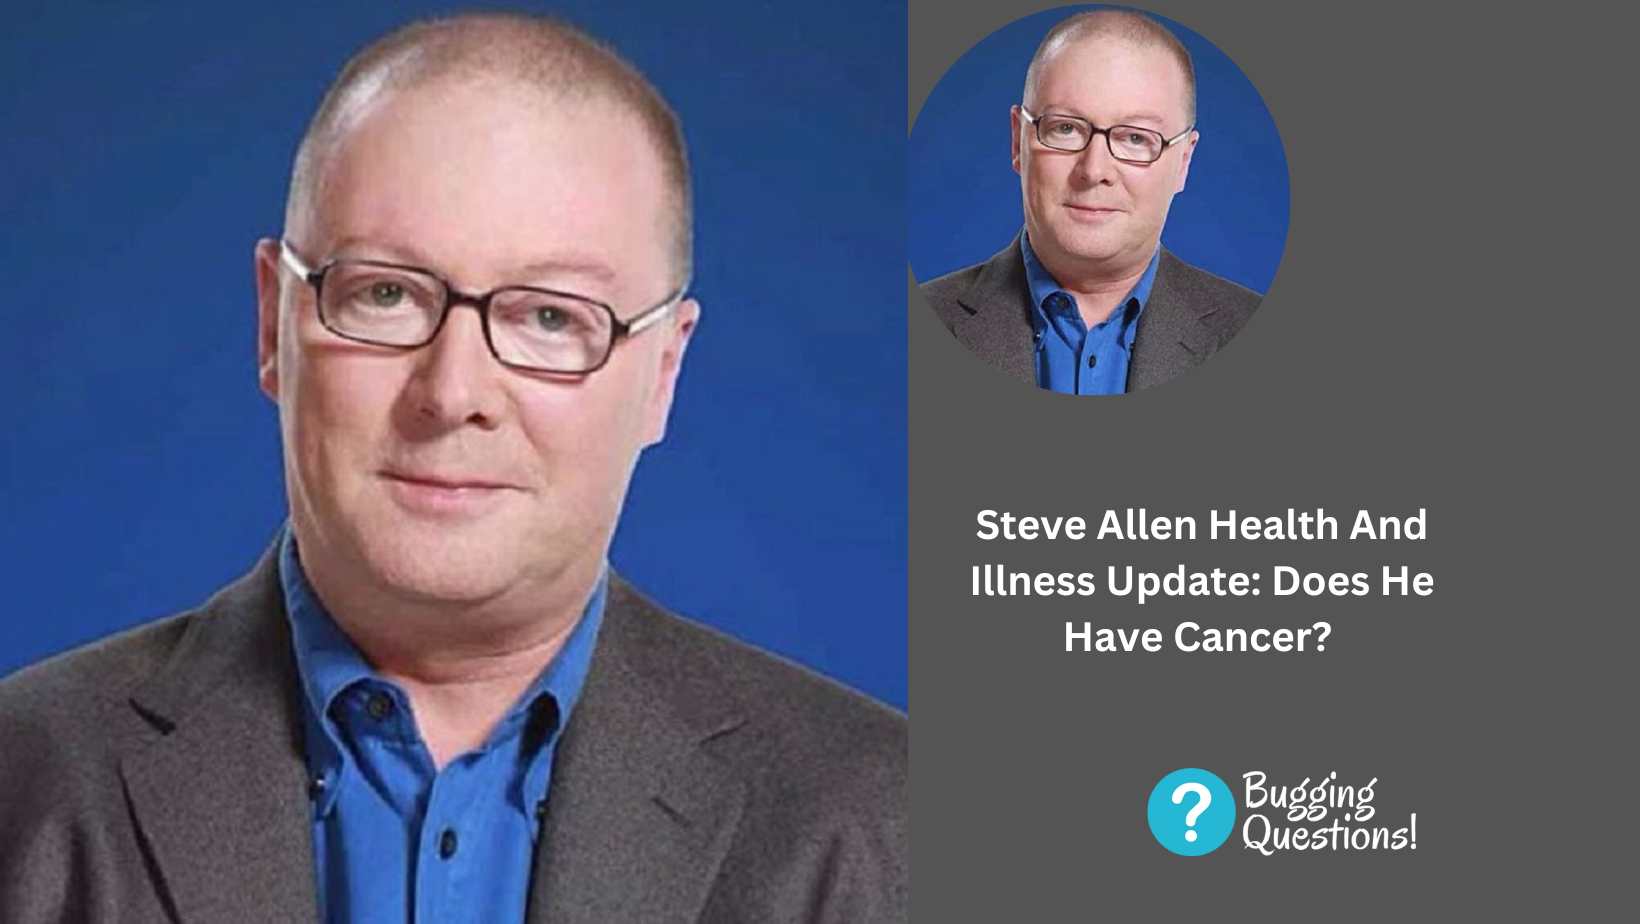 Steve Allen Health And Illness Update: Does He Have Cancer?